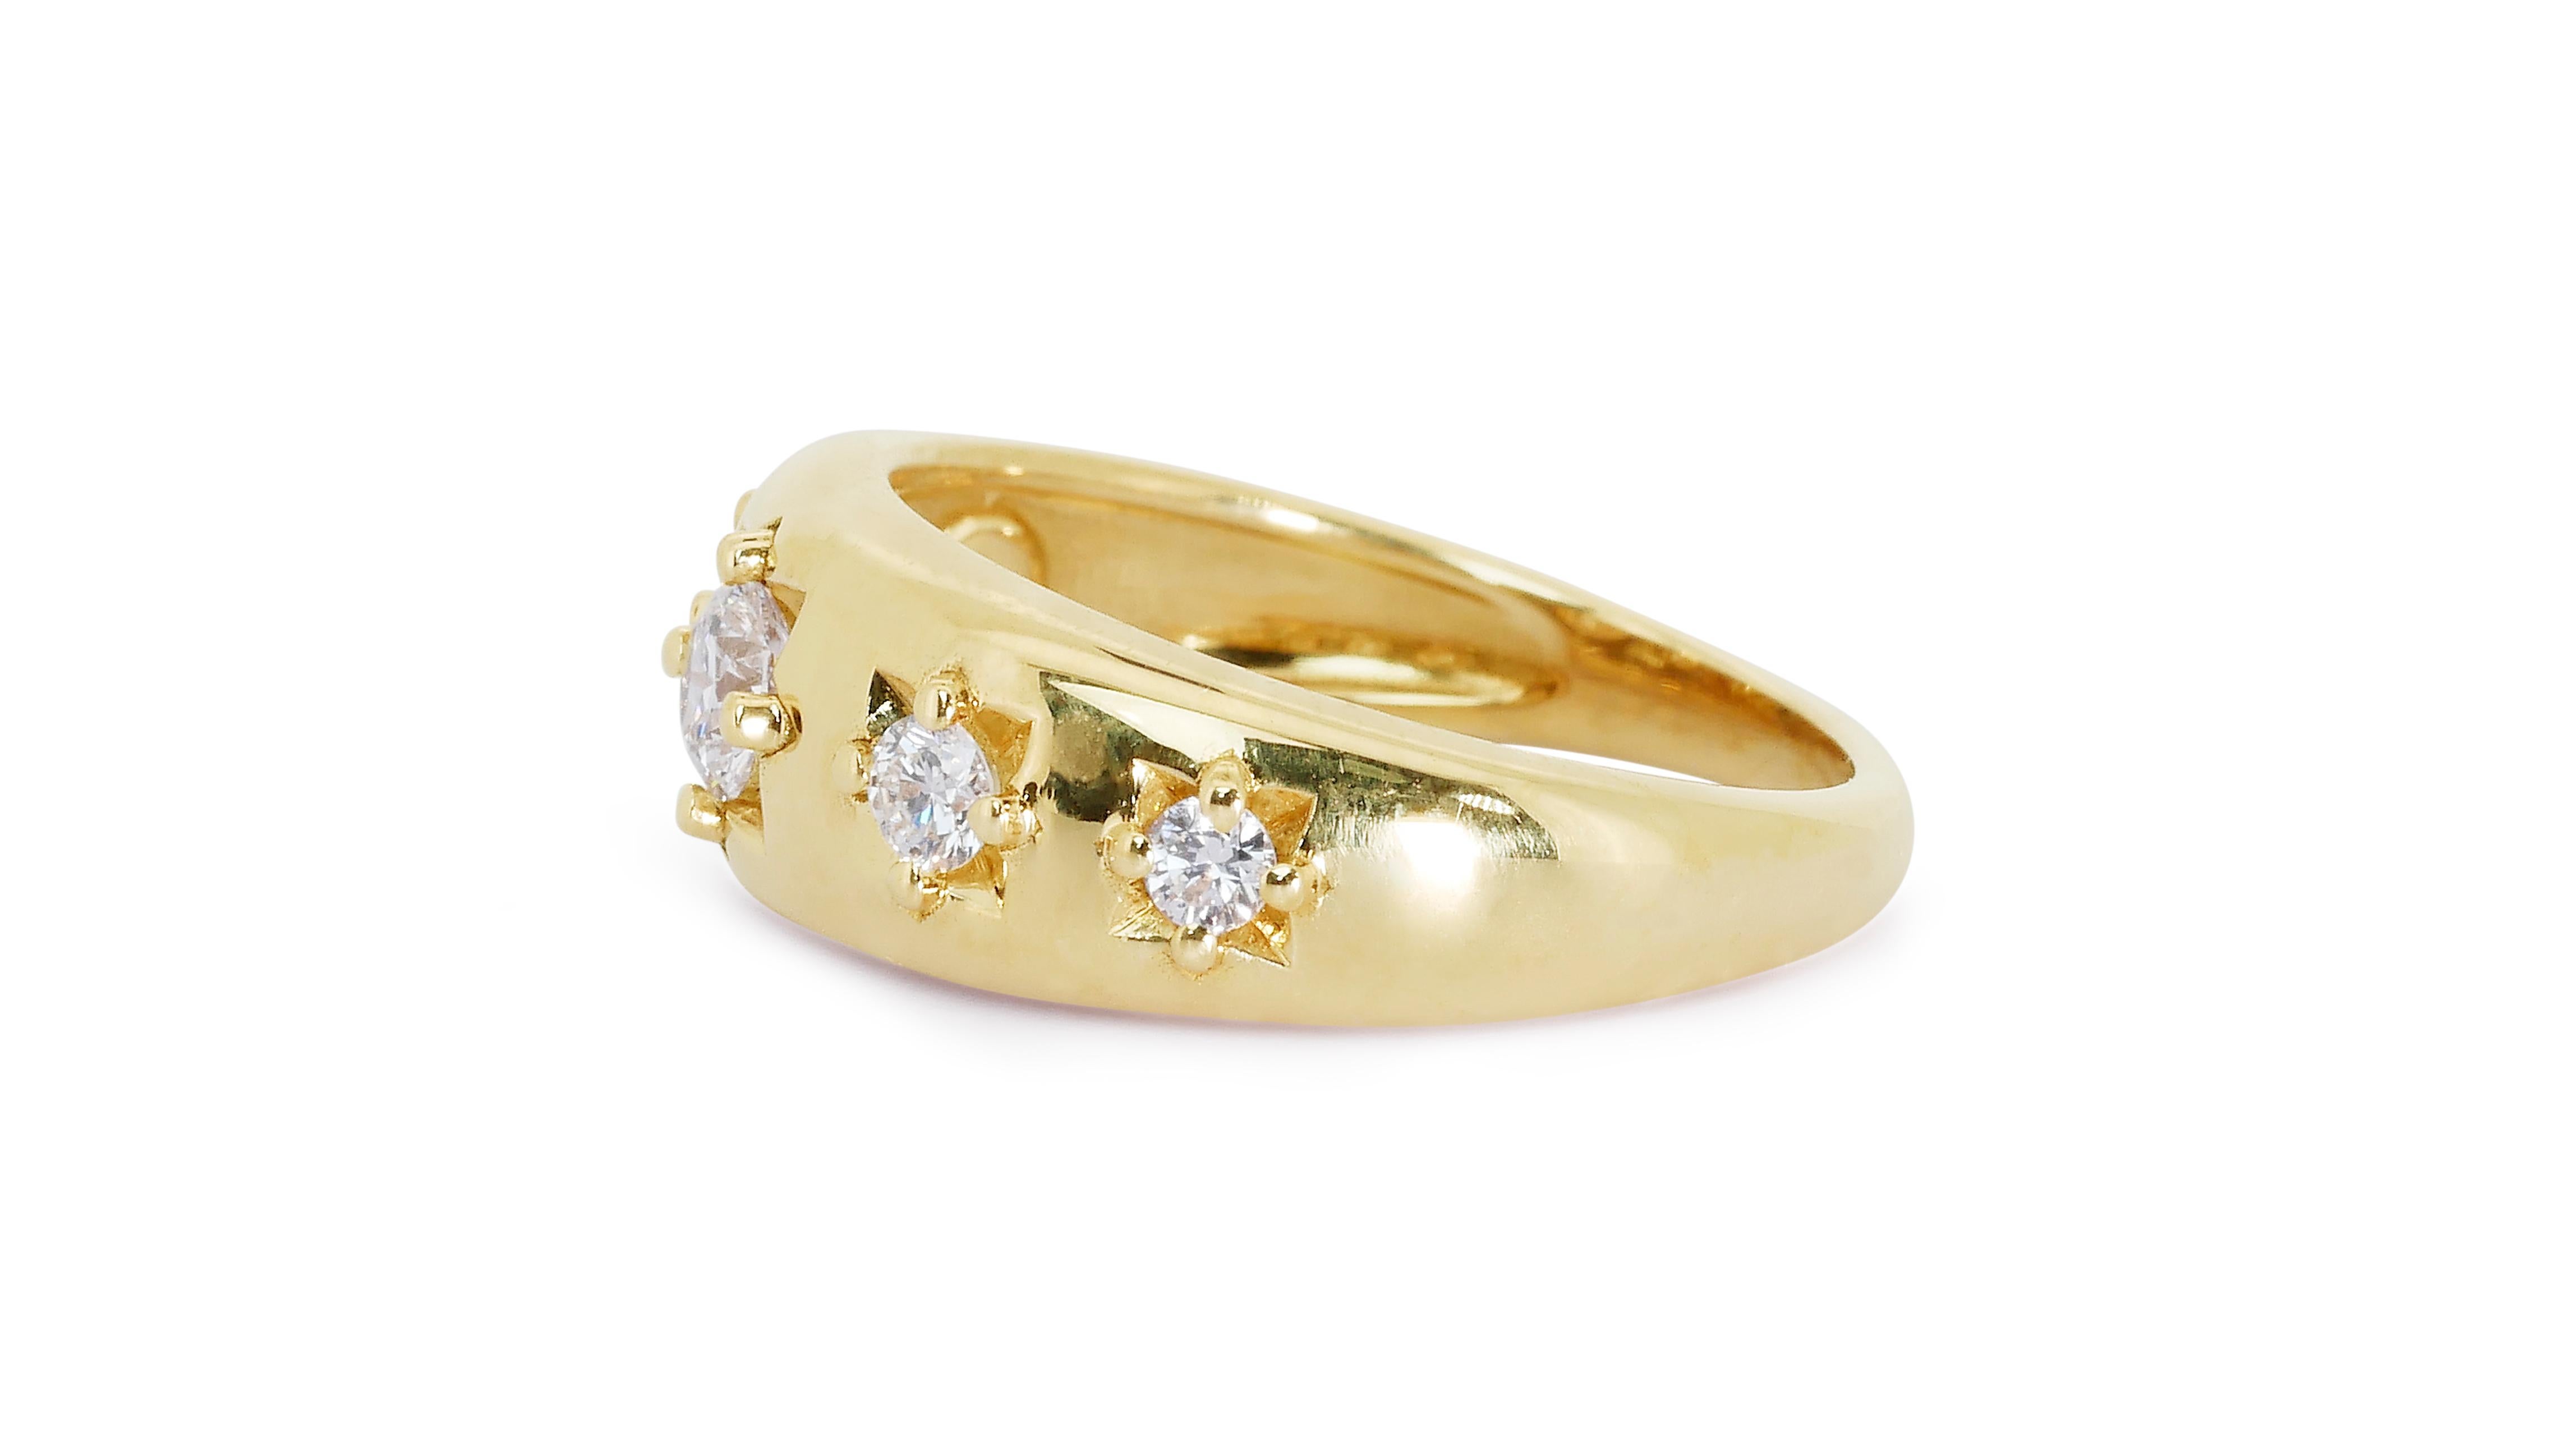 Marvelous 18k Yellow Gold Dome Ring w/ 0.55 Ct Natural Diamonds Aig Certificate In New Condition For Sale In רמת גן, IL